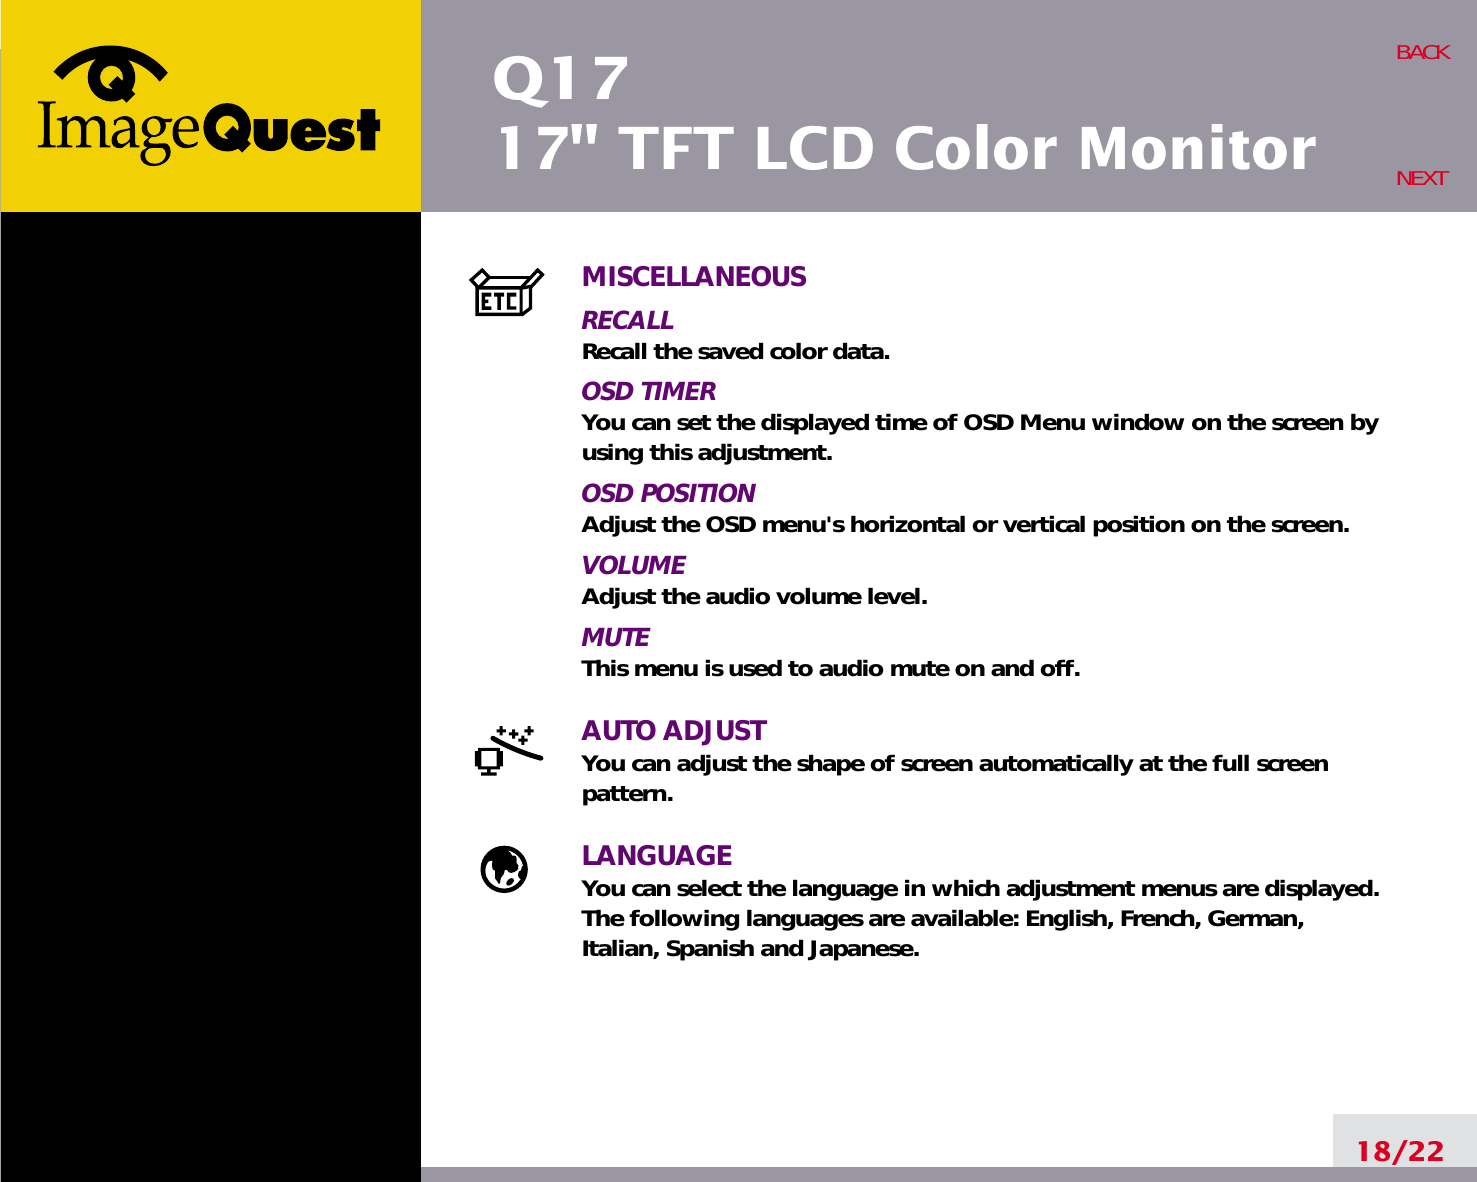 Q1717&quot; TFT LCD Color Monitor18/22BACKNEXTMISCELLANEOUSRECALL Recall the saved color data.OSD TIMERYou can set the displayed time of OSD Menu window on the screen byusing this adjustment.OSD POSITIONAdjust the OSD menu&apos;s horizontal or vertical position on the screen.VOLUMEAdjust the audio volume level.MUTEThis menu is used to audio mute on and off.AUTO ADJUSTYou can adjust the shape of screen automatically at the full screenpattern.LANGUAGEYou can select the language in which adjustment menus are displayed. The following languages are available: English, French, German, Italian, Spanish and Japanese.